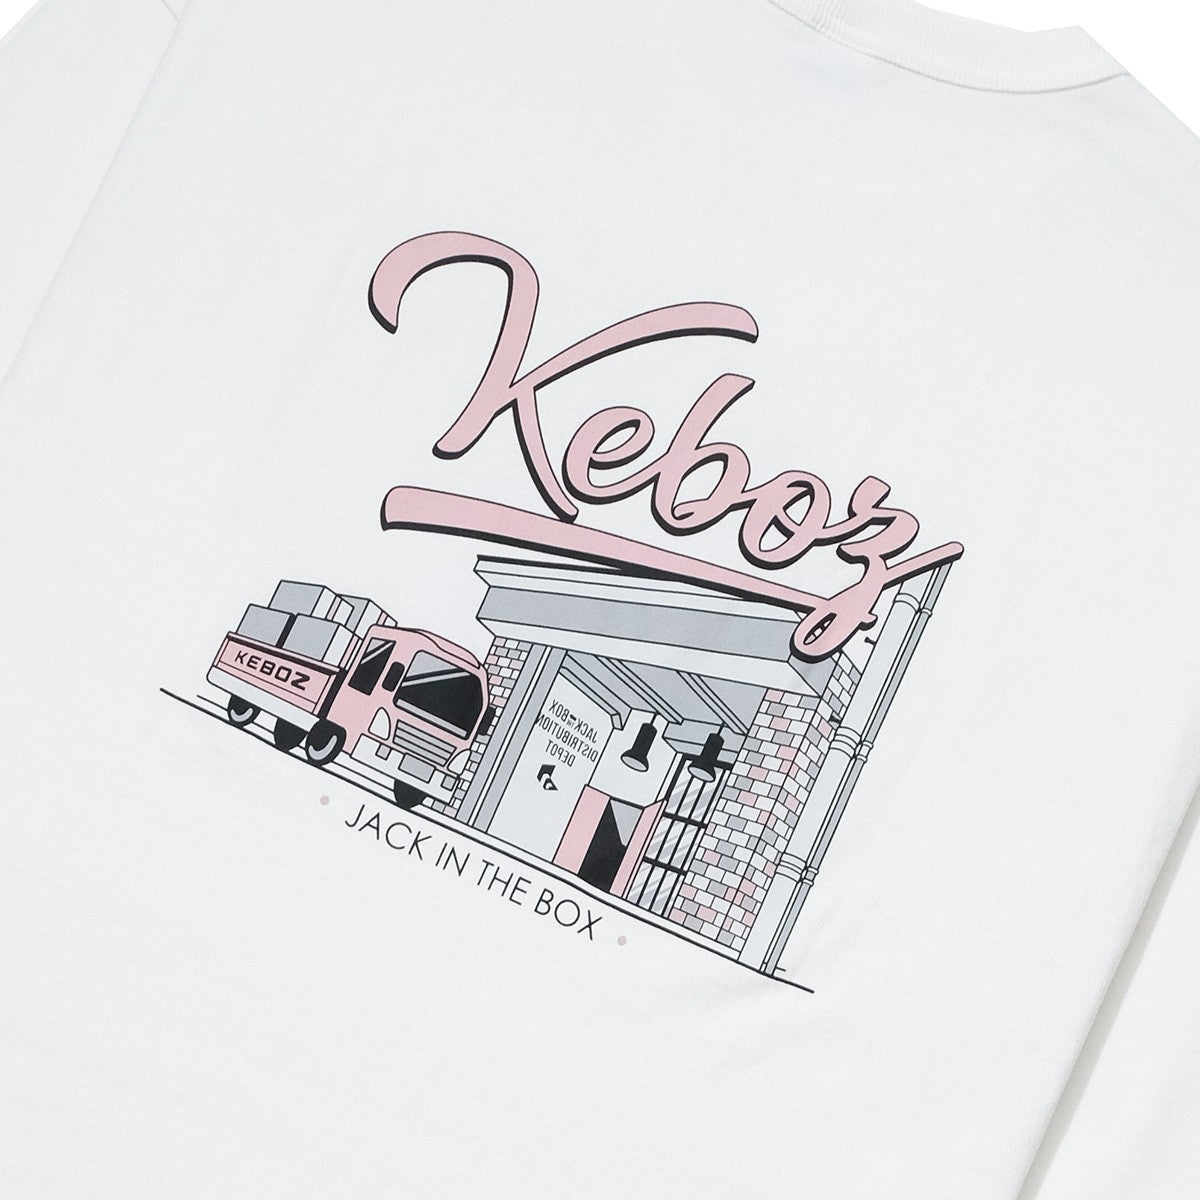 KEBOZ / JACK IN THE BOX 12 YEAR ANNIVERSARY L/S TEE| JACK in the